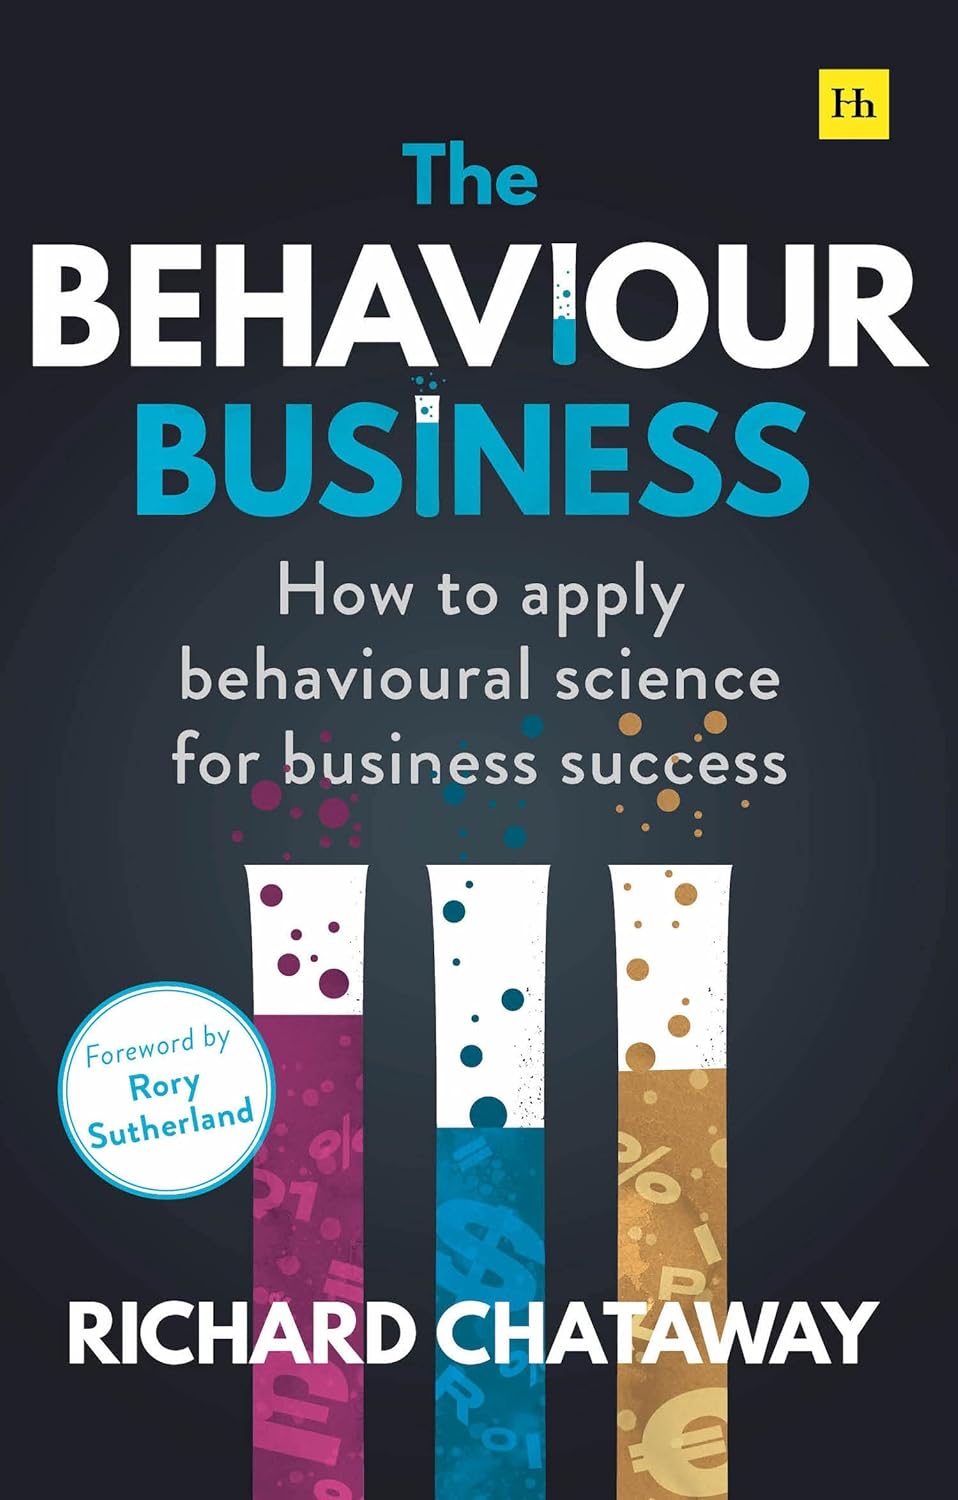 The Behaviour Business: How to apply behavioural science for business success Paperback – February 18, 2020